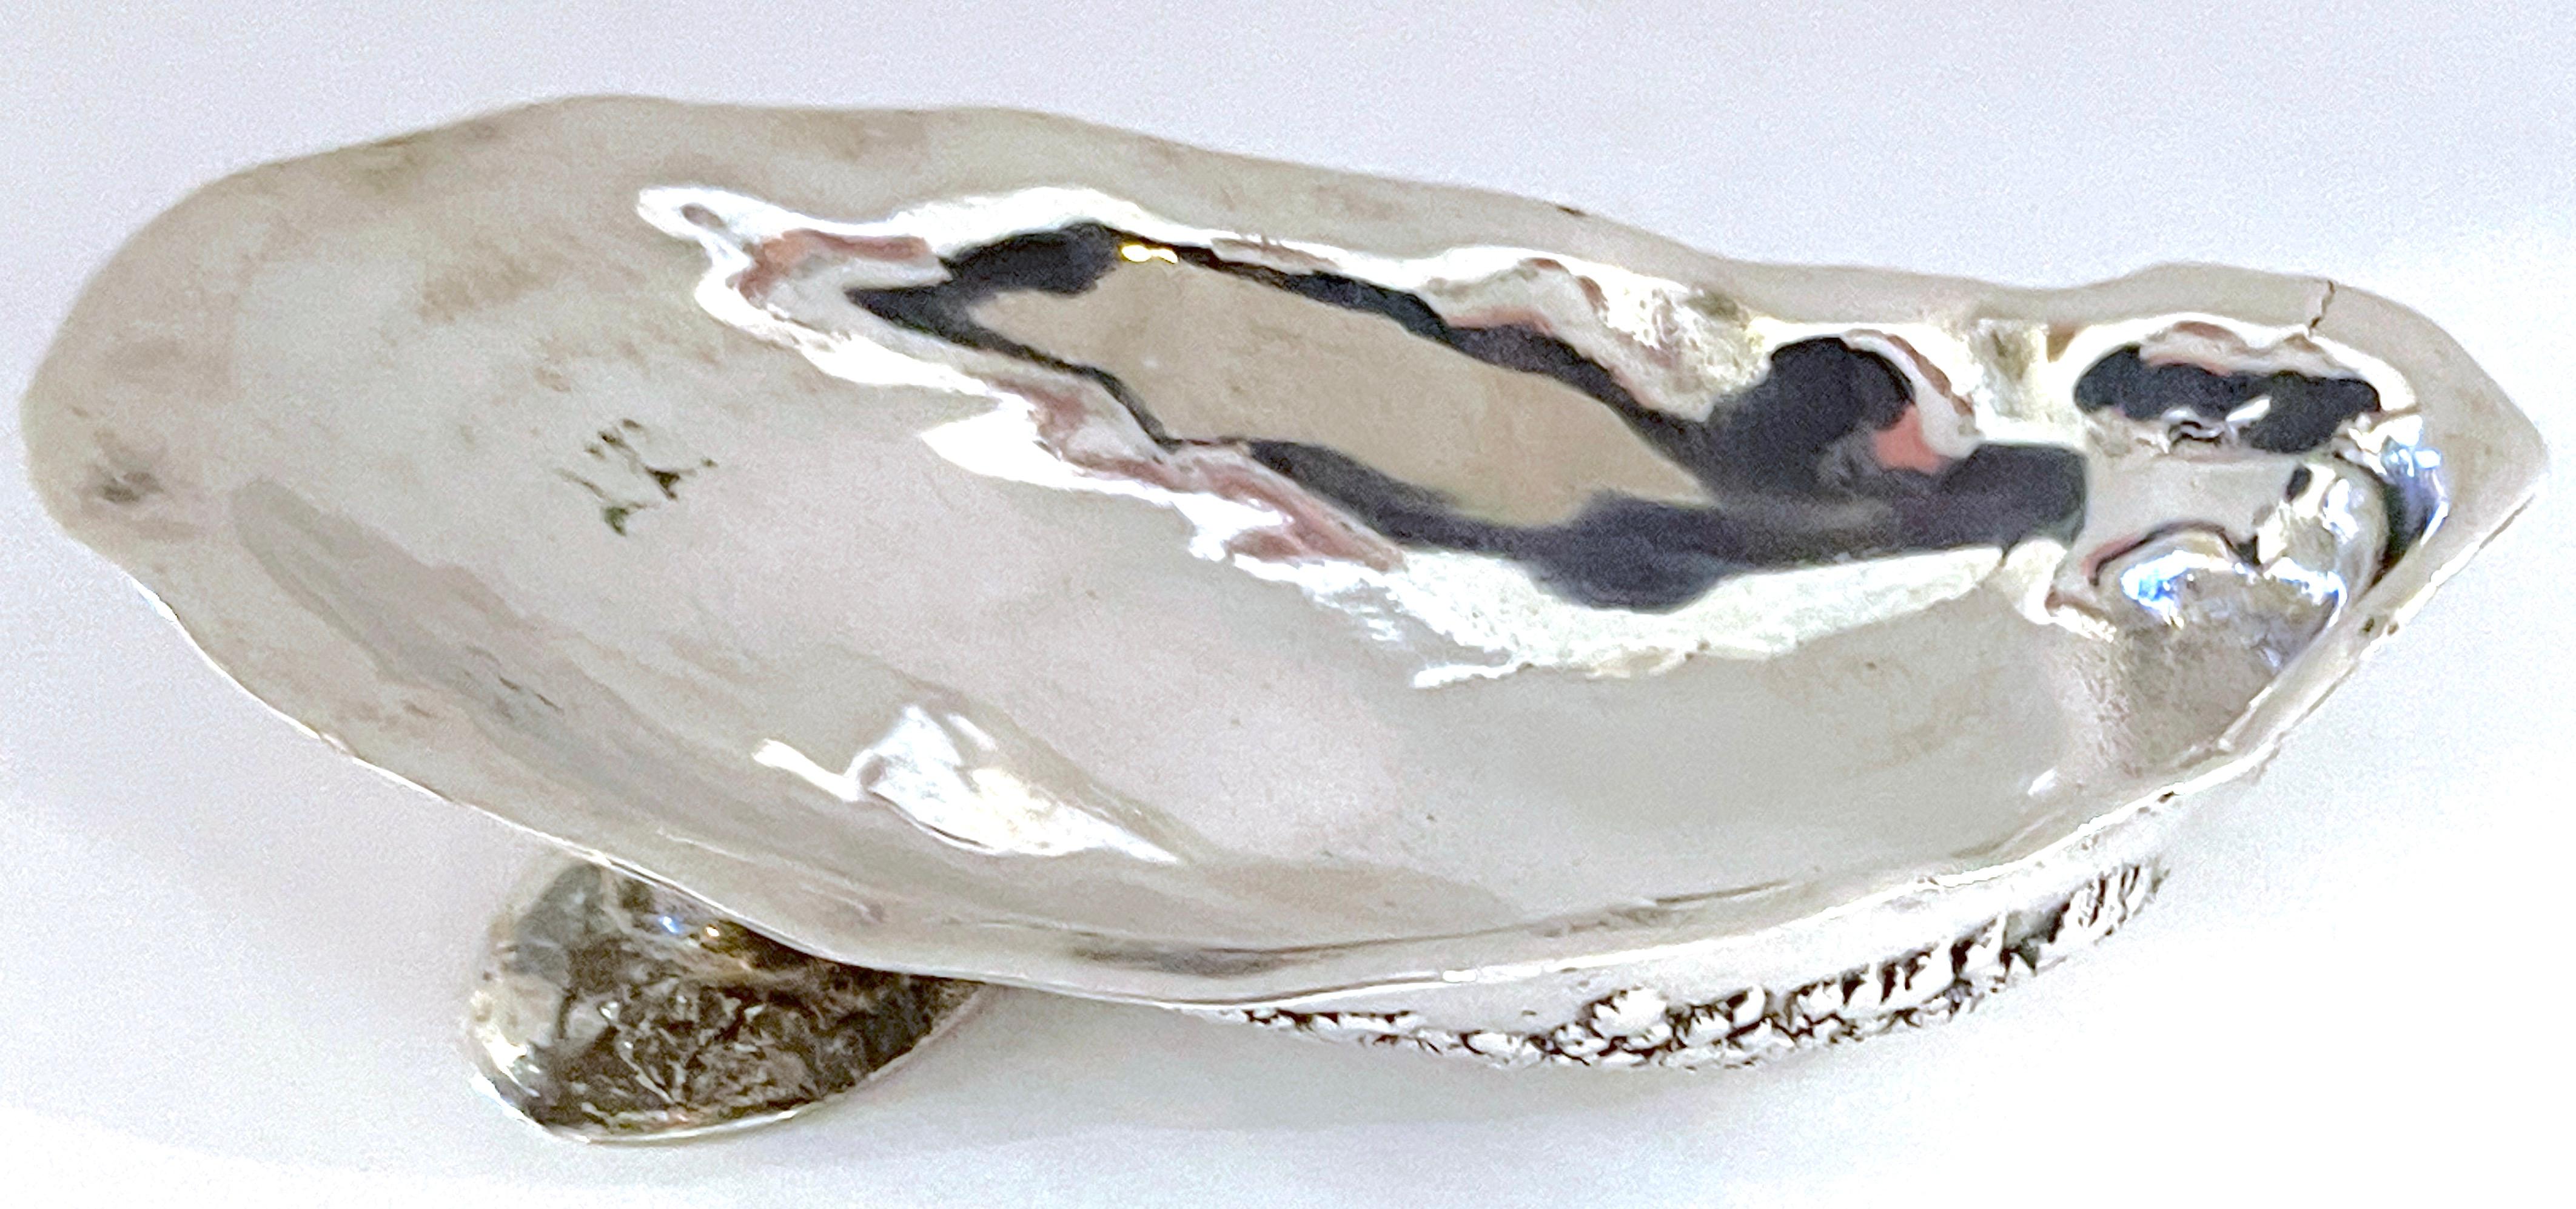 Gorham 'Narragansett' Sterling- Silver Shell Dish & Figural Crab Spoon In Good Condition For Sale In West Palm Beach, FL